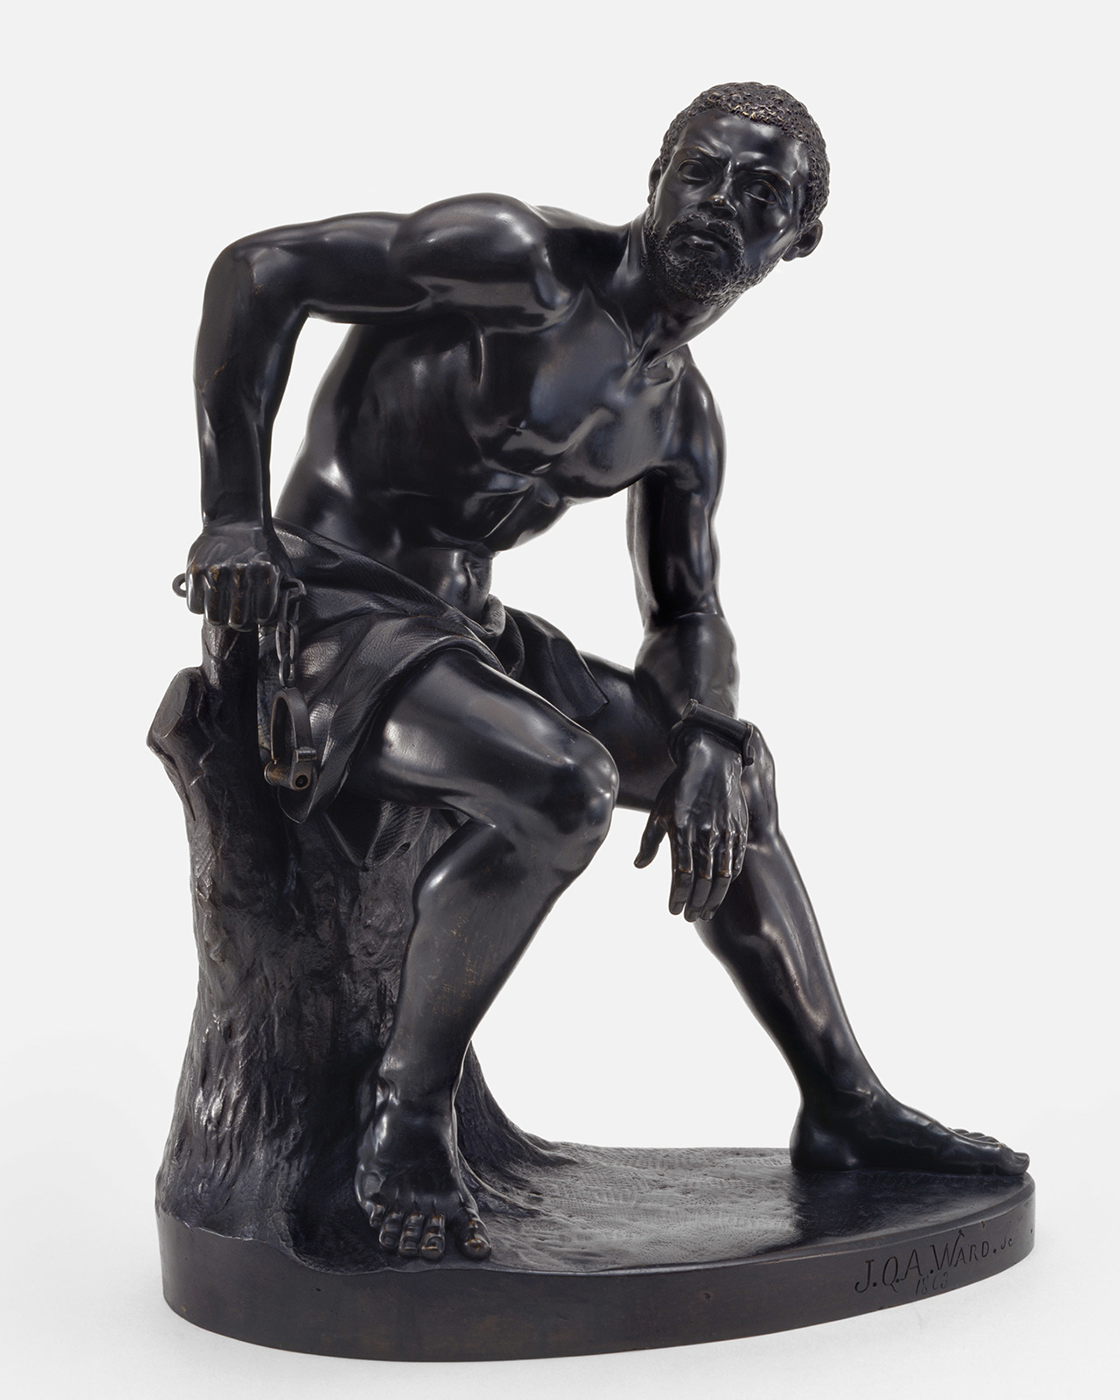 A striking black bronze sculpture titled 'The Freedman,' depicting a male figure in a moment of weary contemplation. The figure is crouched, his muscular form and defined features captured with exquisite detail. One hand rests on his knee while the other supports him on the tree stump beside, suggesting a moment of rest or reflection. The surface of the sculpture is smooth and polished, giving a lifelike quality to the man's expression and physique. There's a palpable sense of narrative and emotion in the pose and the finely rendered textures of his hair and the tree bark